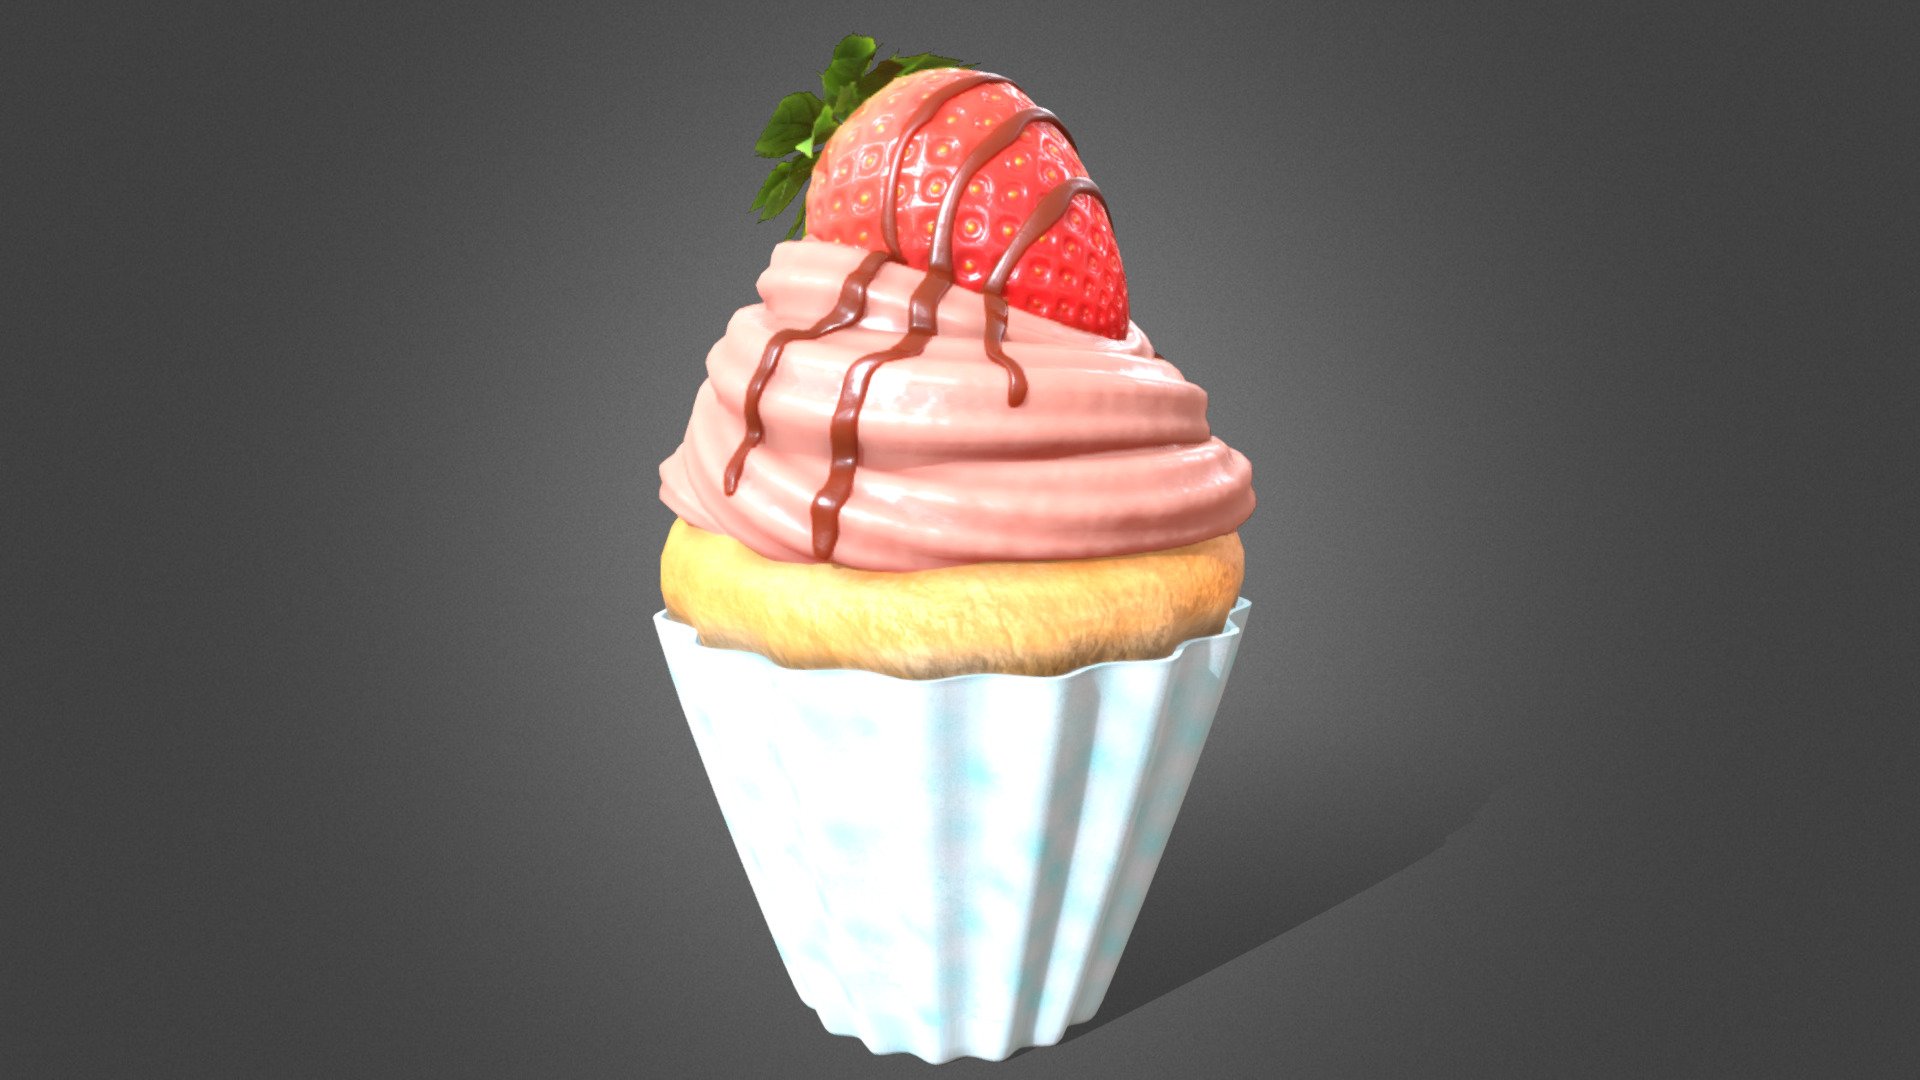 This is a redo of my previous cupcake model from 2019. I have learned quite a lot since then and I hope to improve my skills more in the future 3d model